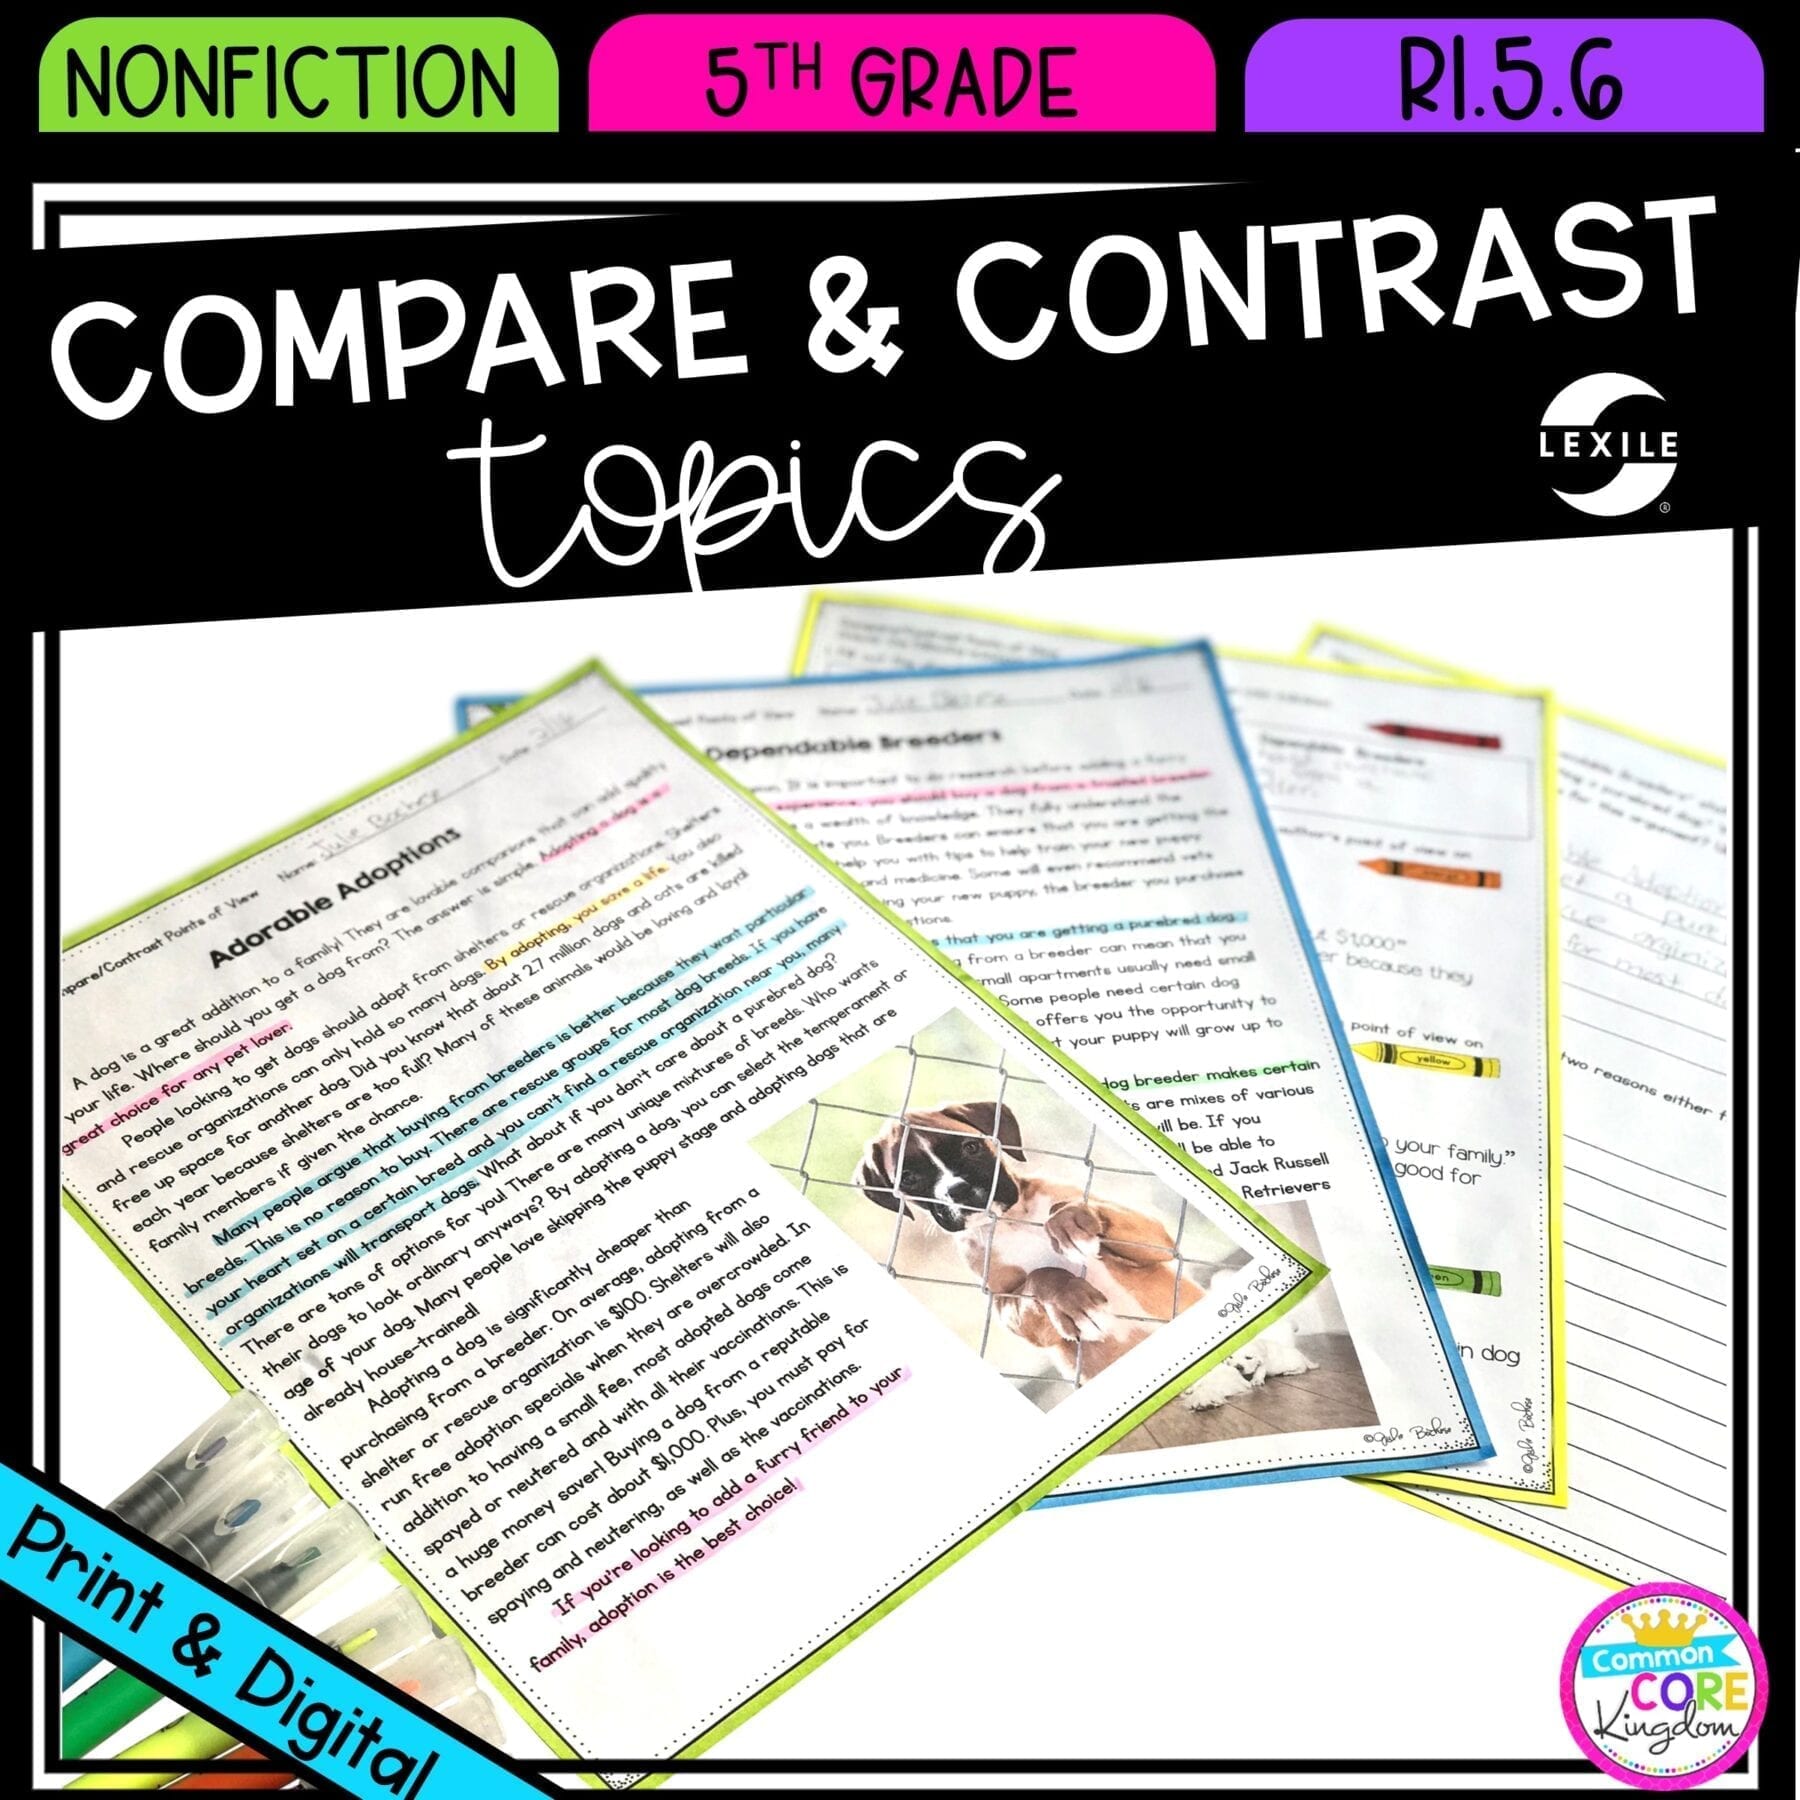 Compare & Contrast Topics from Different Points of View for 5th grade cover showing printable and digital worksheets